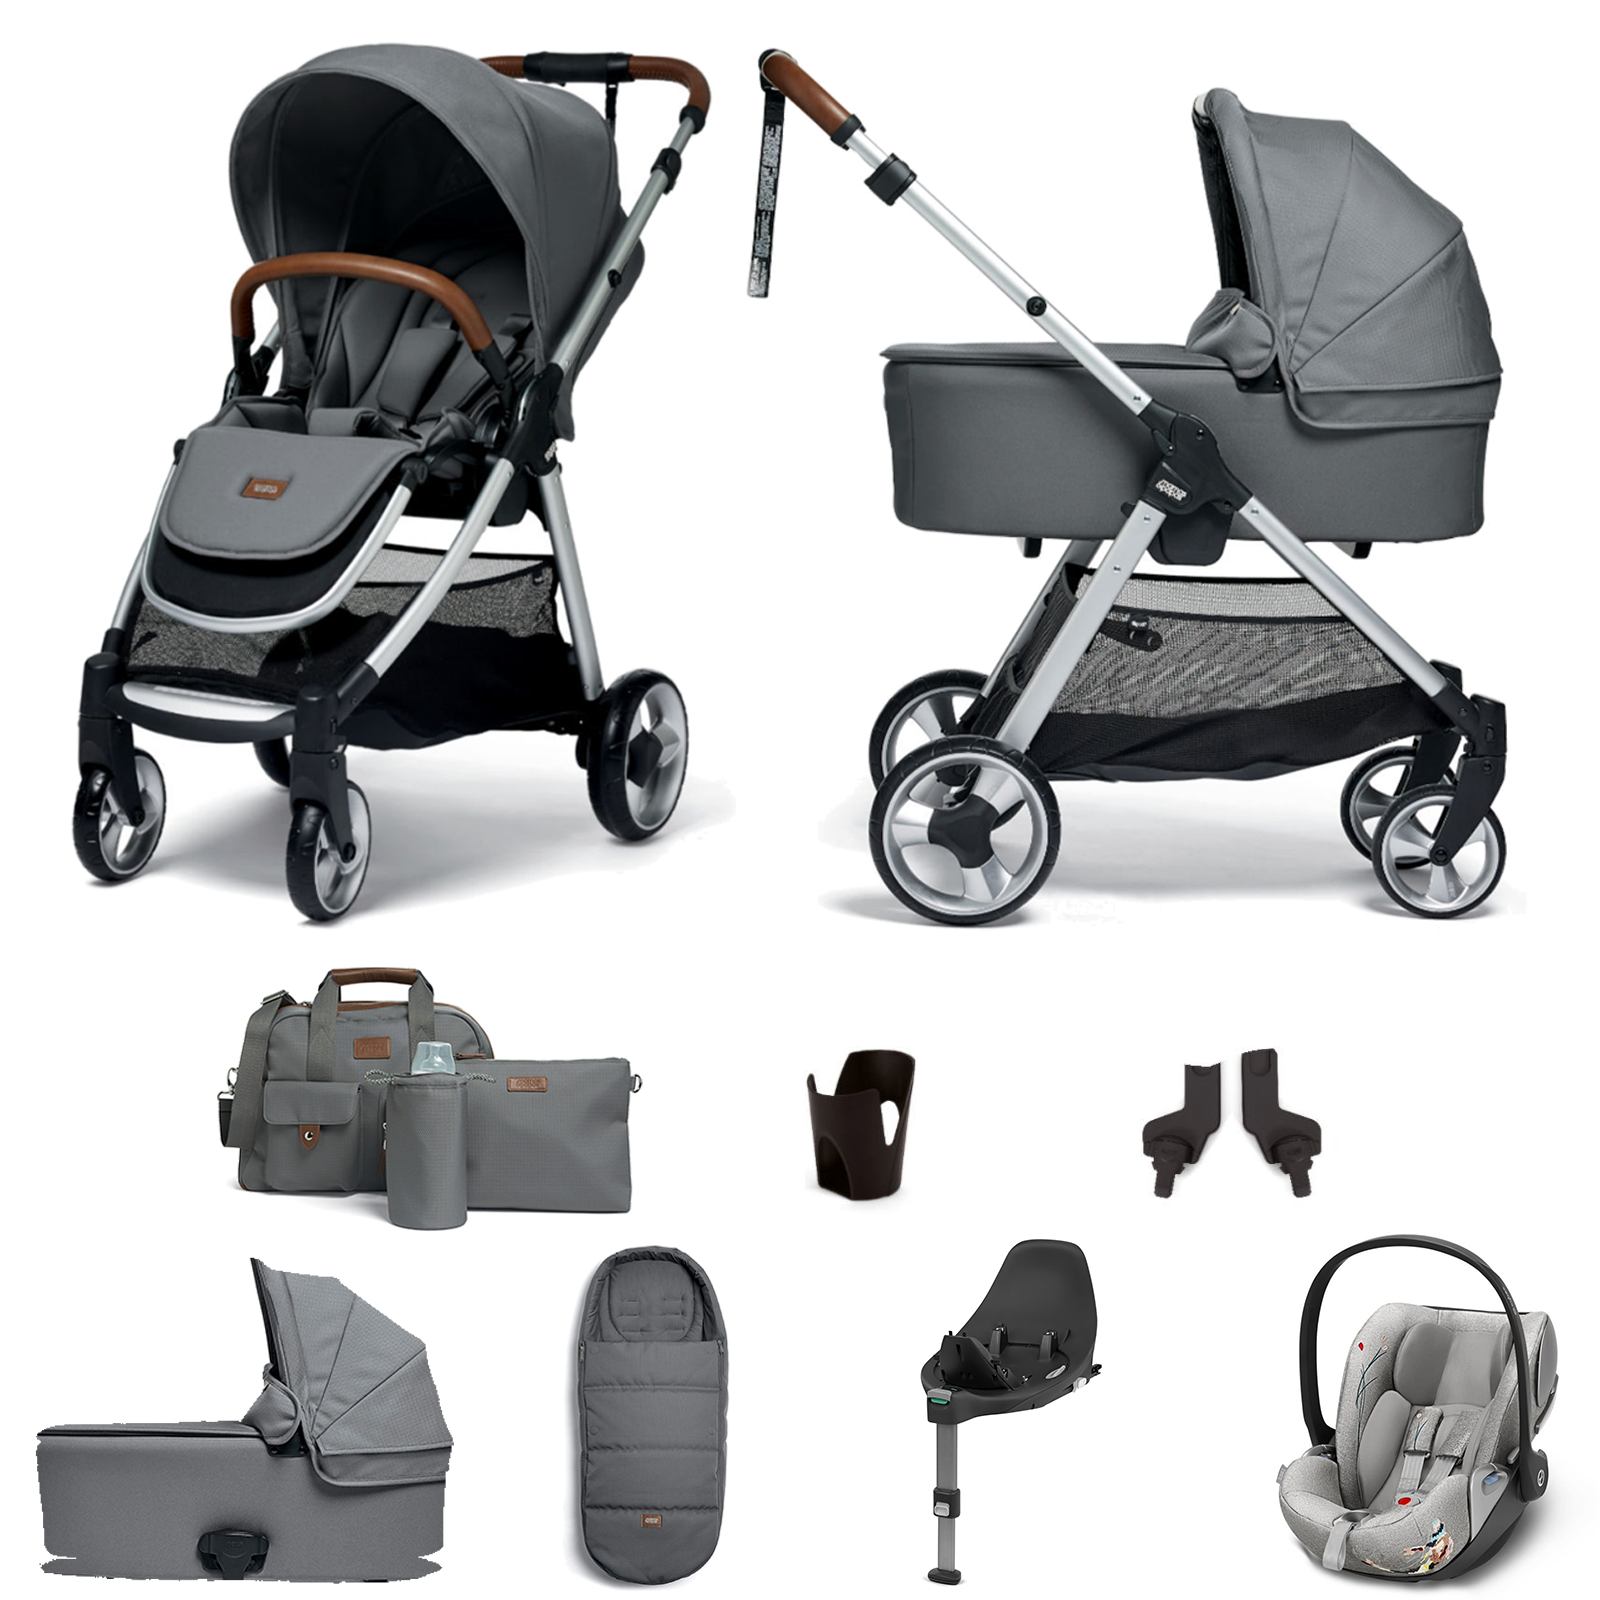 Mamas & Papas Flip XT2 Essentials (Cloud Z Car Seat & ISOFIX Base) Travel System with Carrycot, Footmuff & Changing Bag - Fossil Grey